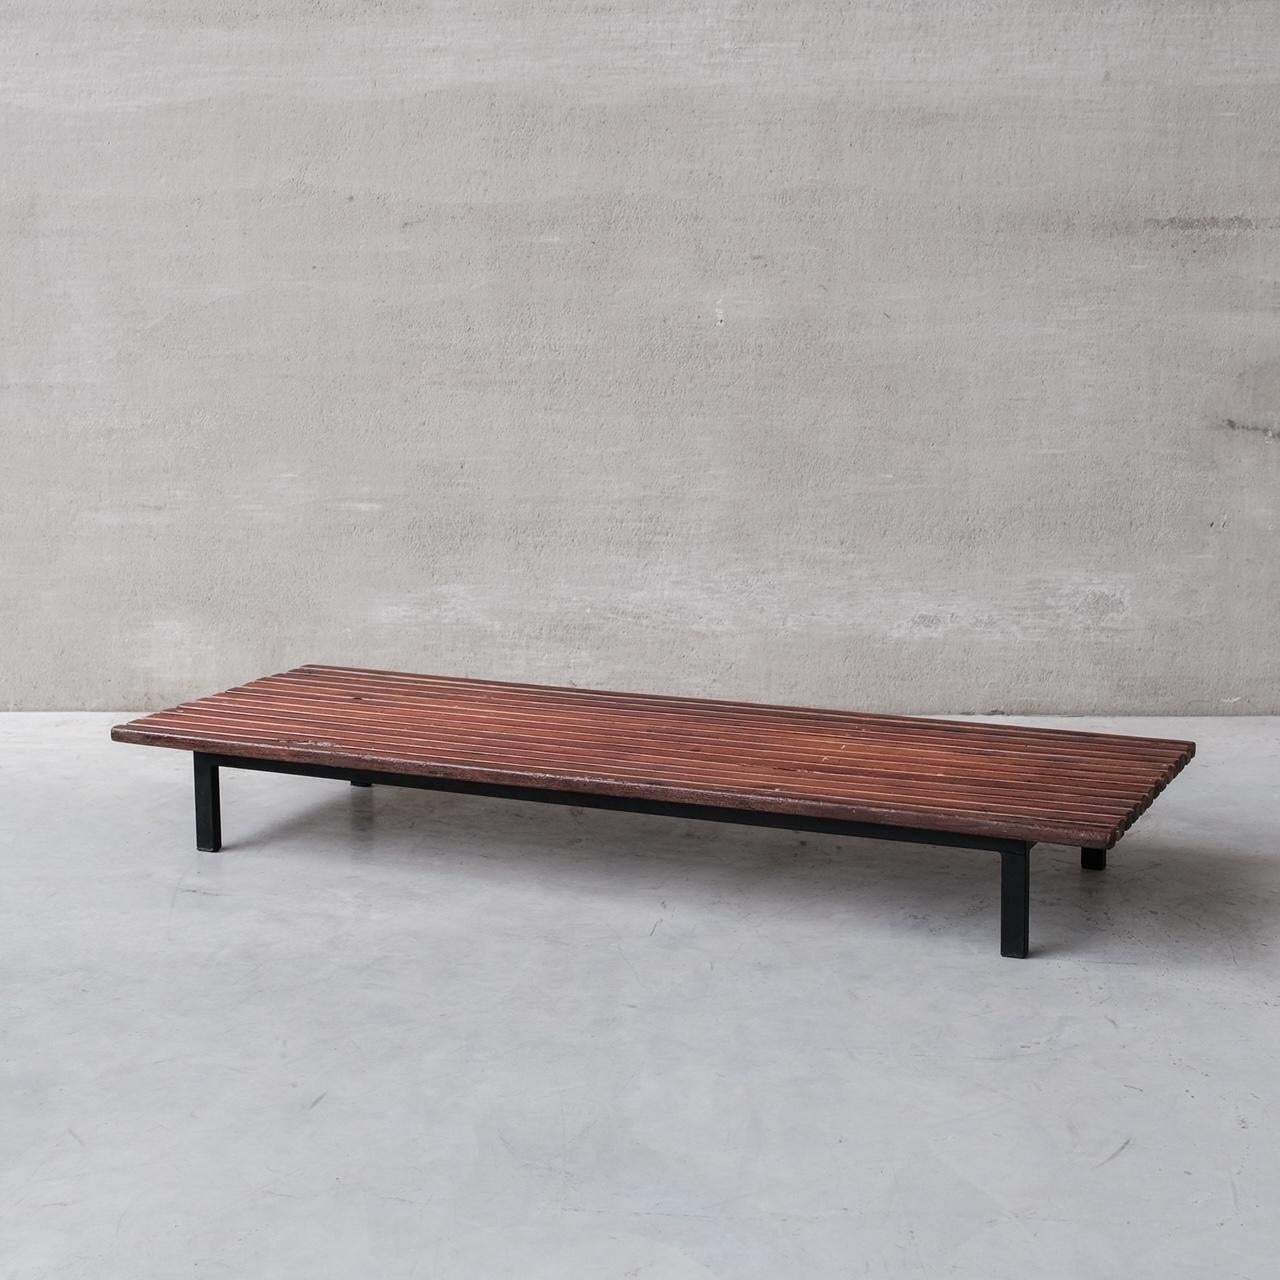 A scarce bench, daybed by Charlotte Perriand for Steph Simon.

But easily and best placed we believe as a coffee table.

France, circa 1950s.

Originally designed by legendary designer Perriand for the 'cite Cansado' project and subsequently